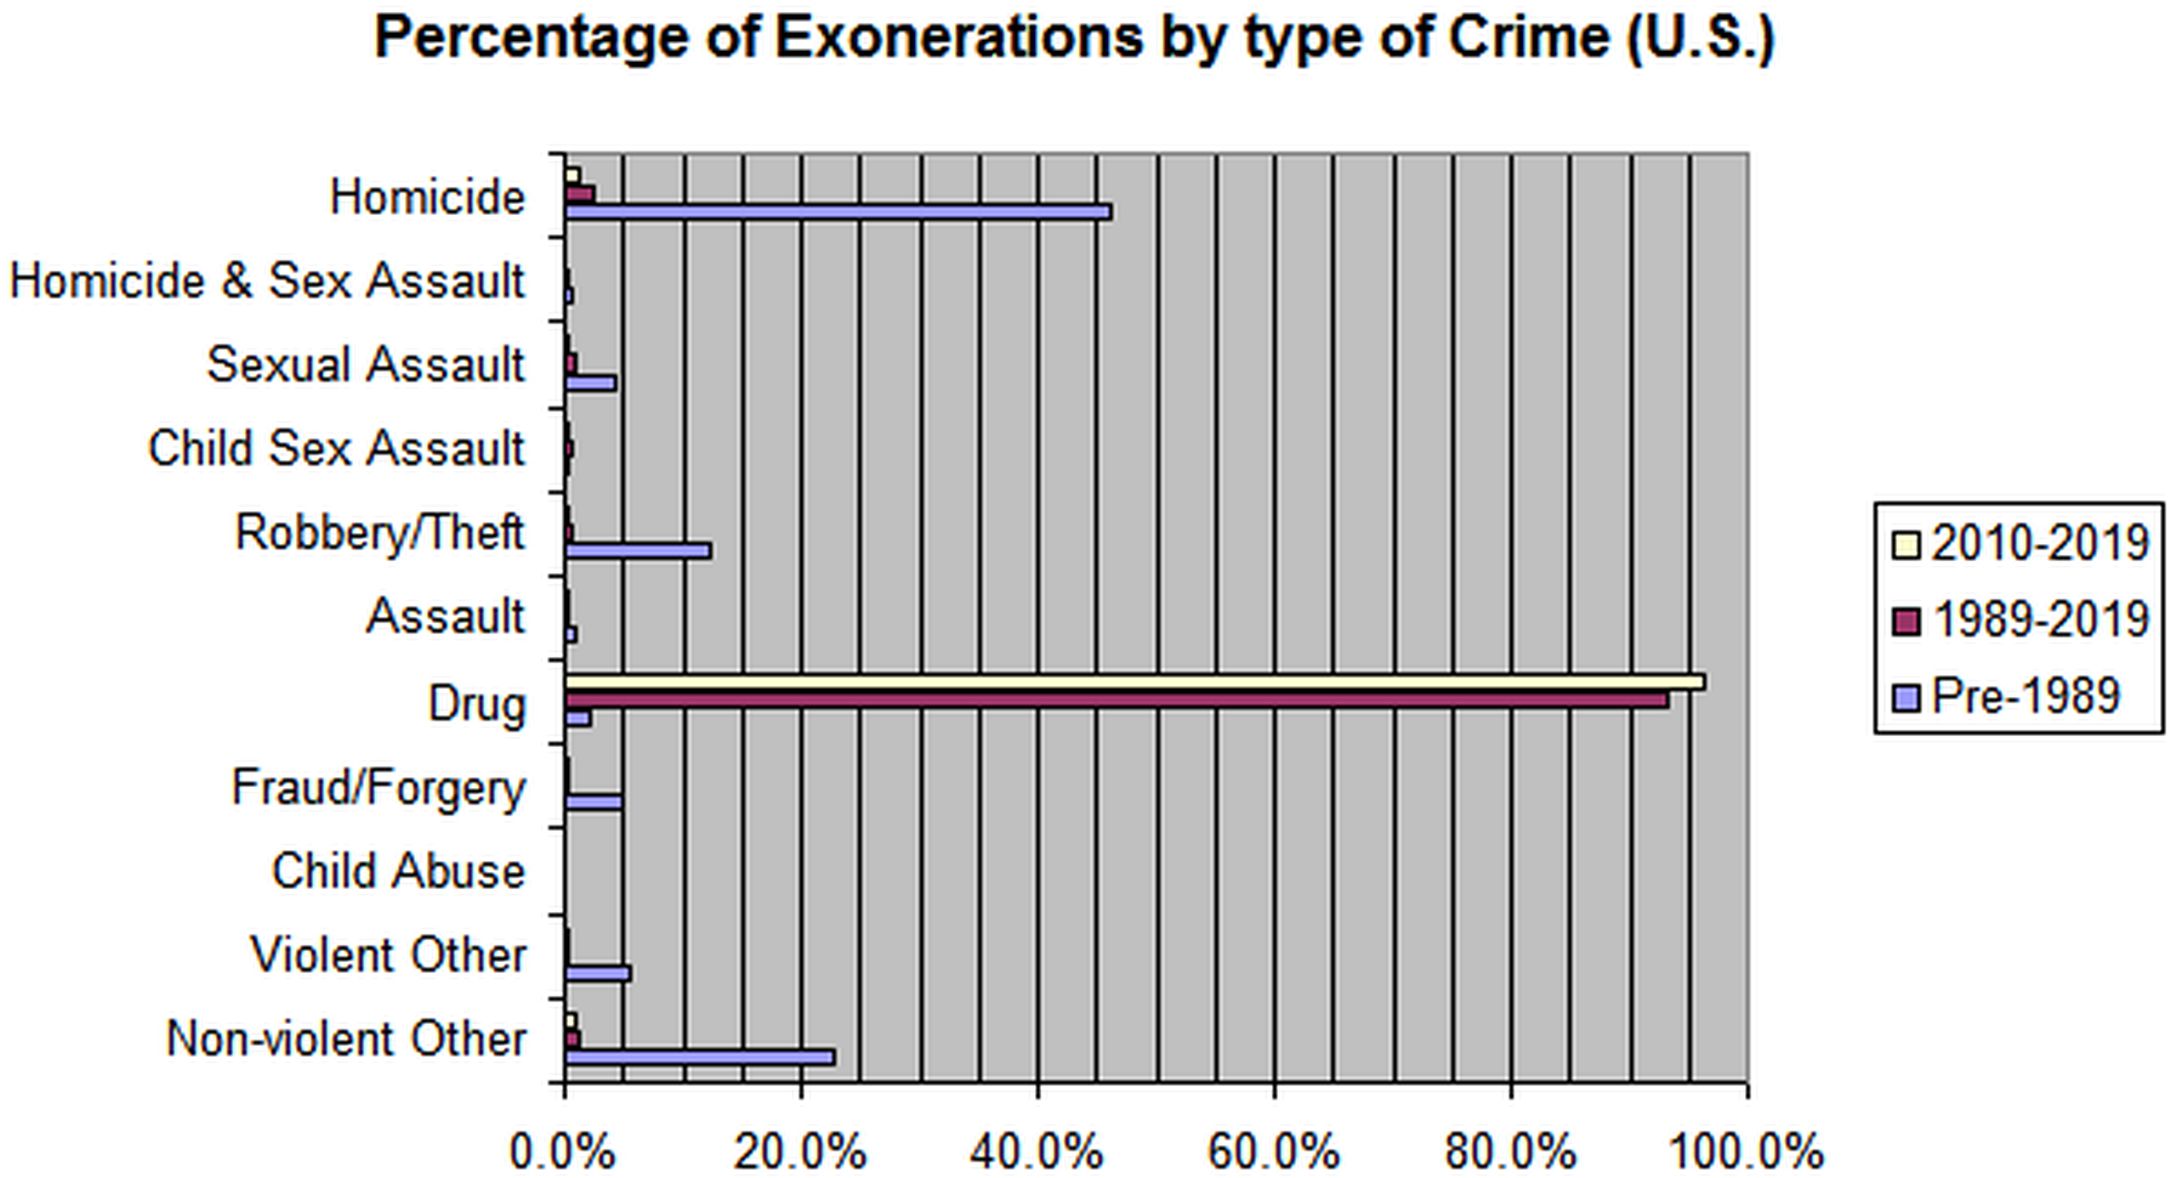 Percentage of US Exonerations by type of crime